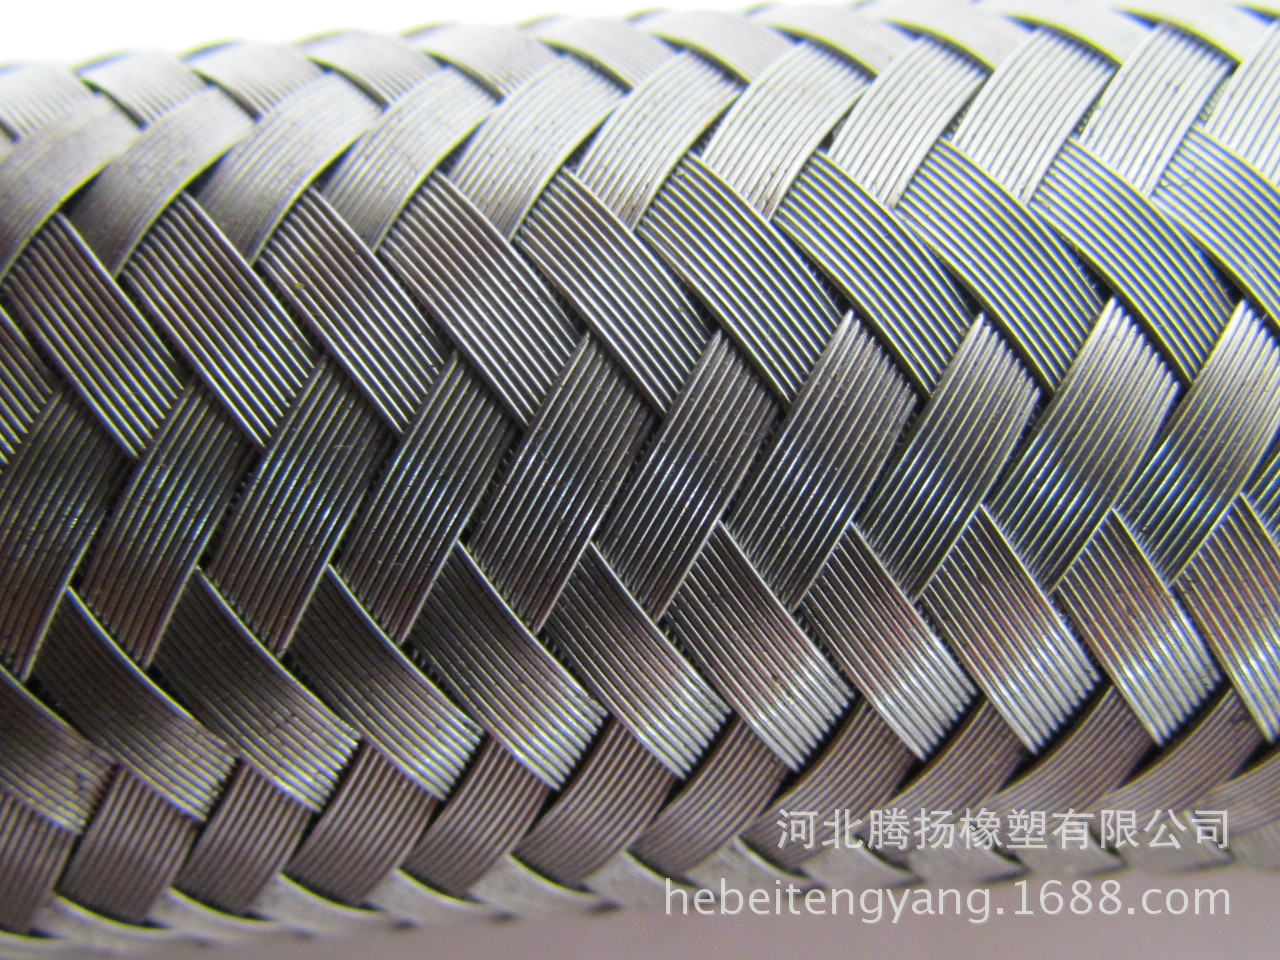 54397-stainless-steel-braided-